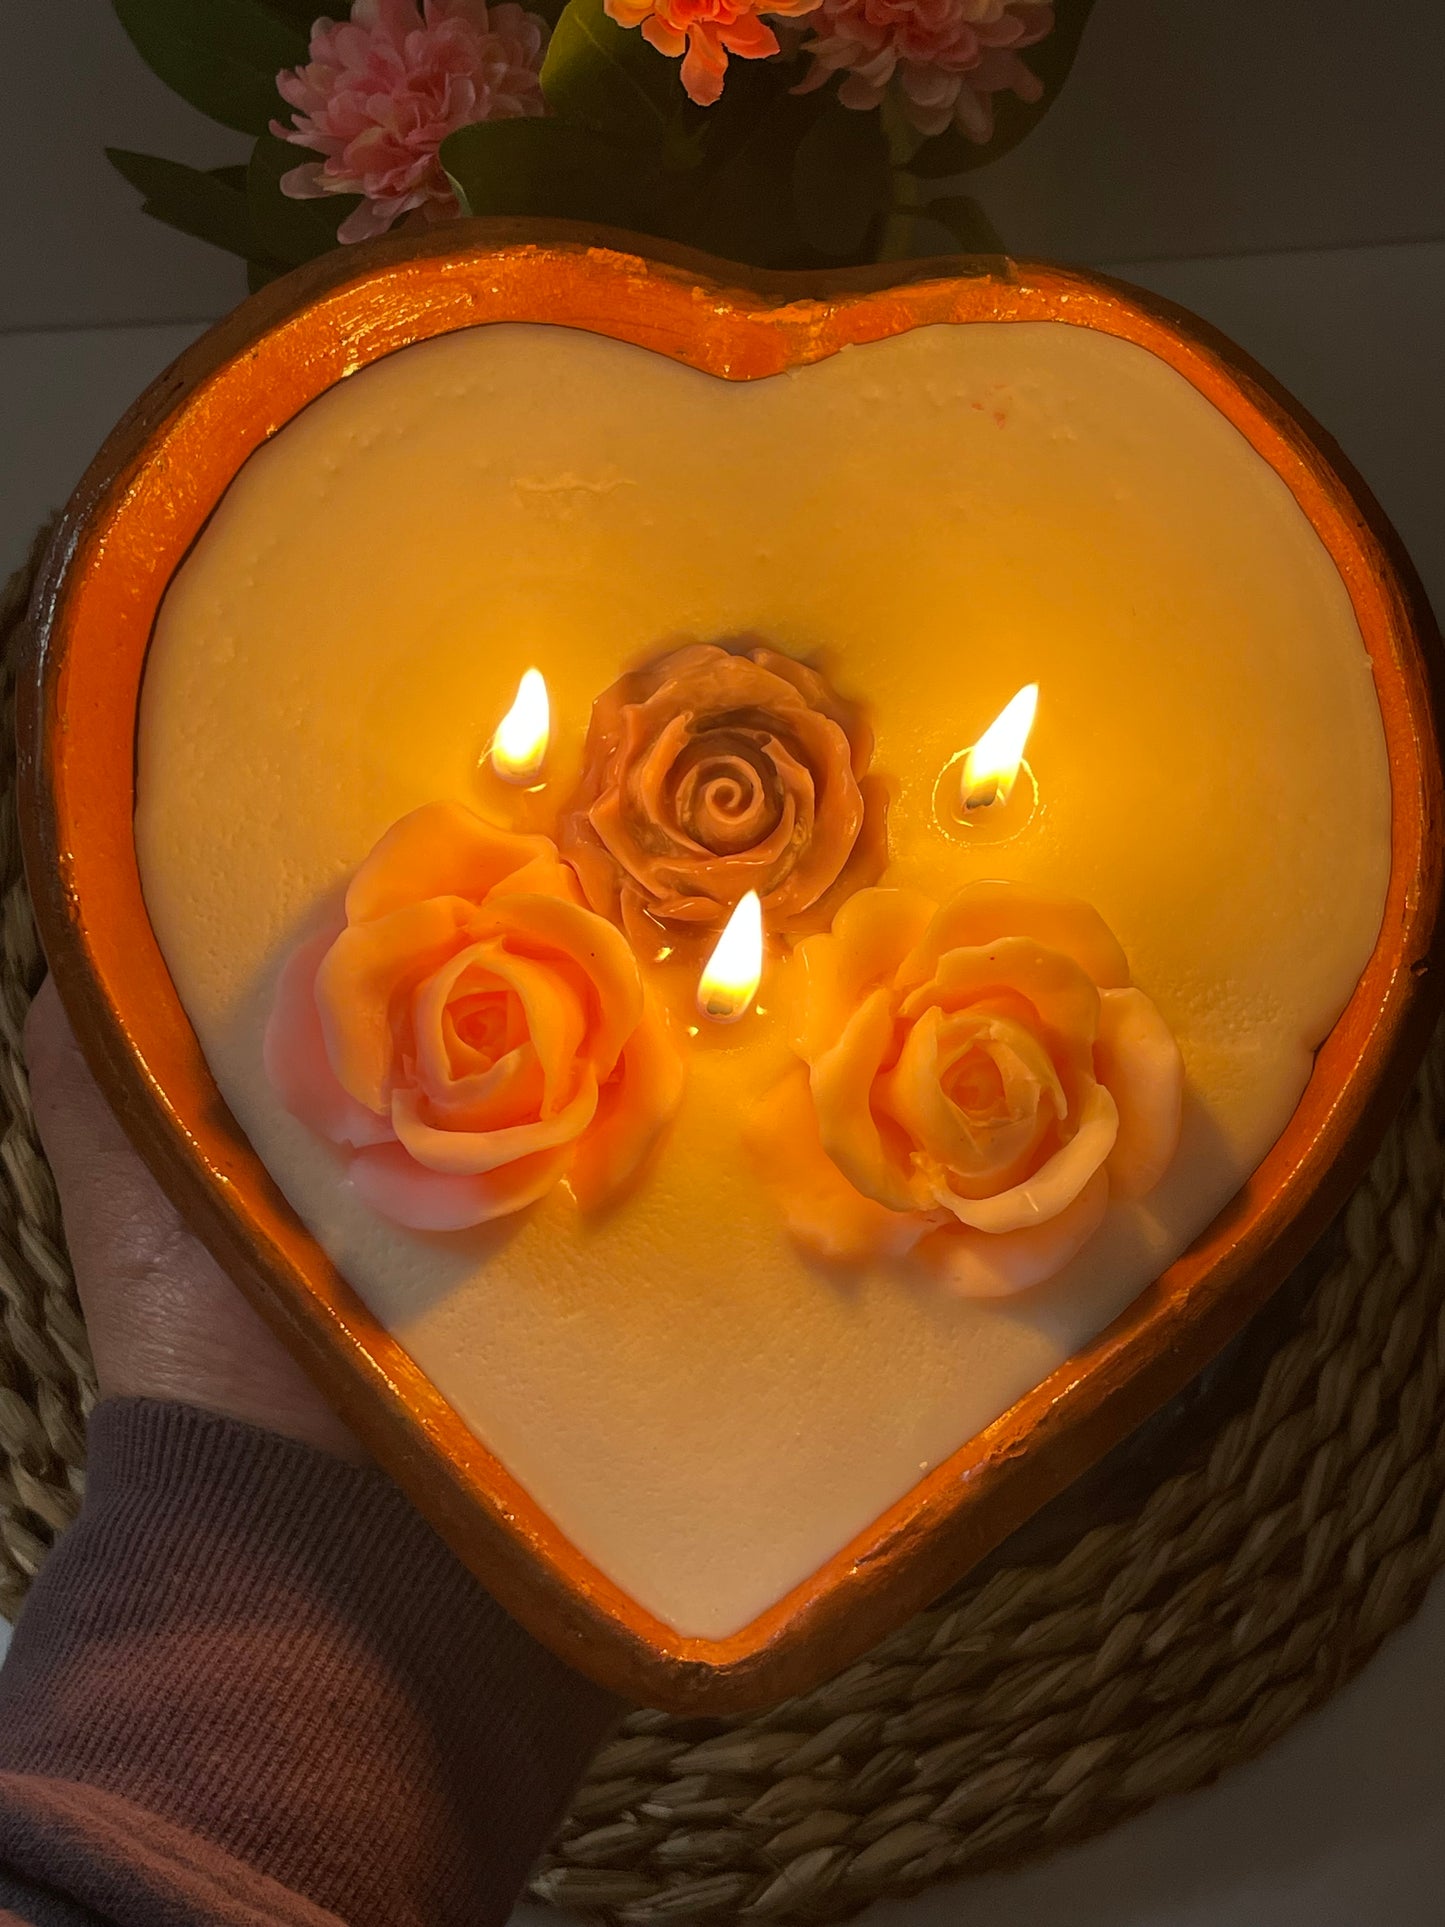 Mother’s Day Sale! Vela Amor Eterno/EverAfter heart candle/soy wax candle/handmade/hand poured/mexico candle/unscented candle/valentines gift/Mother’s Day gift